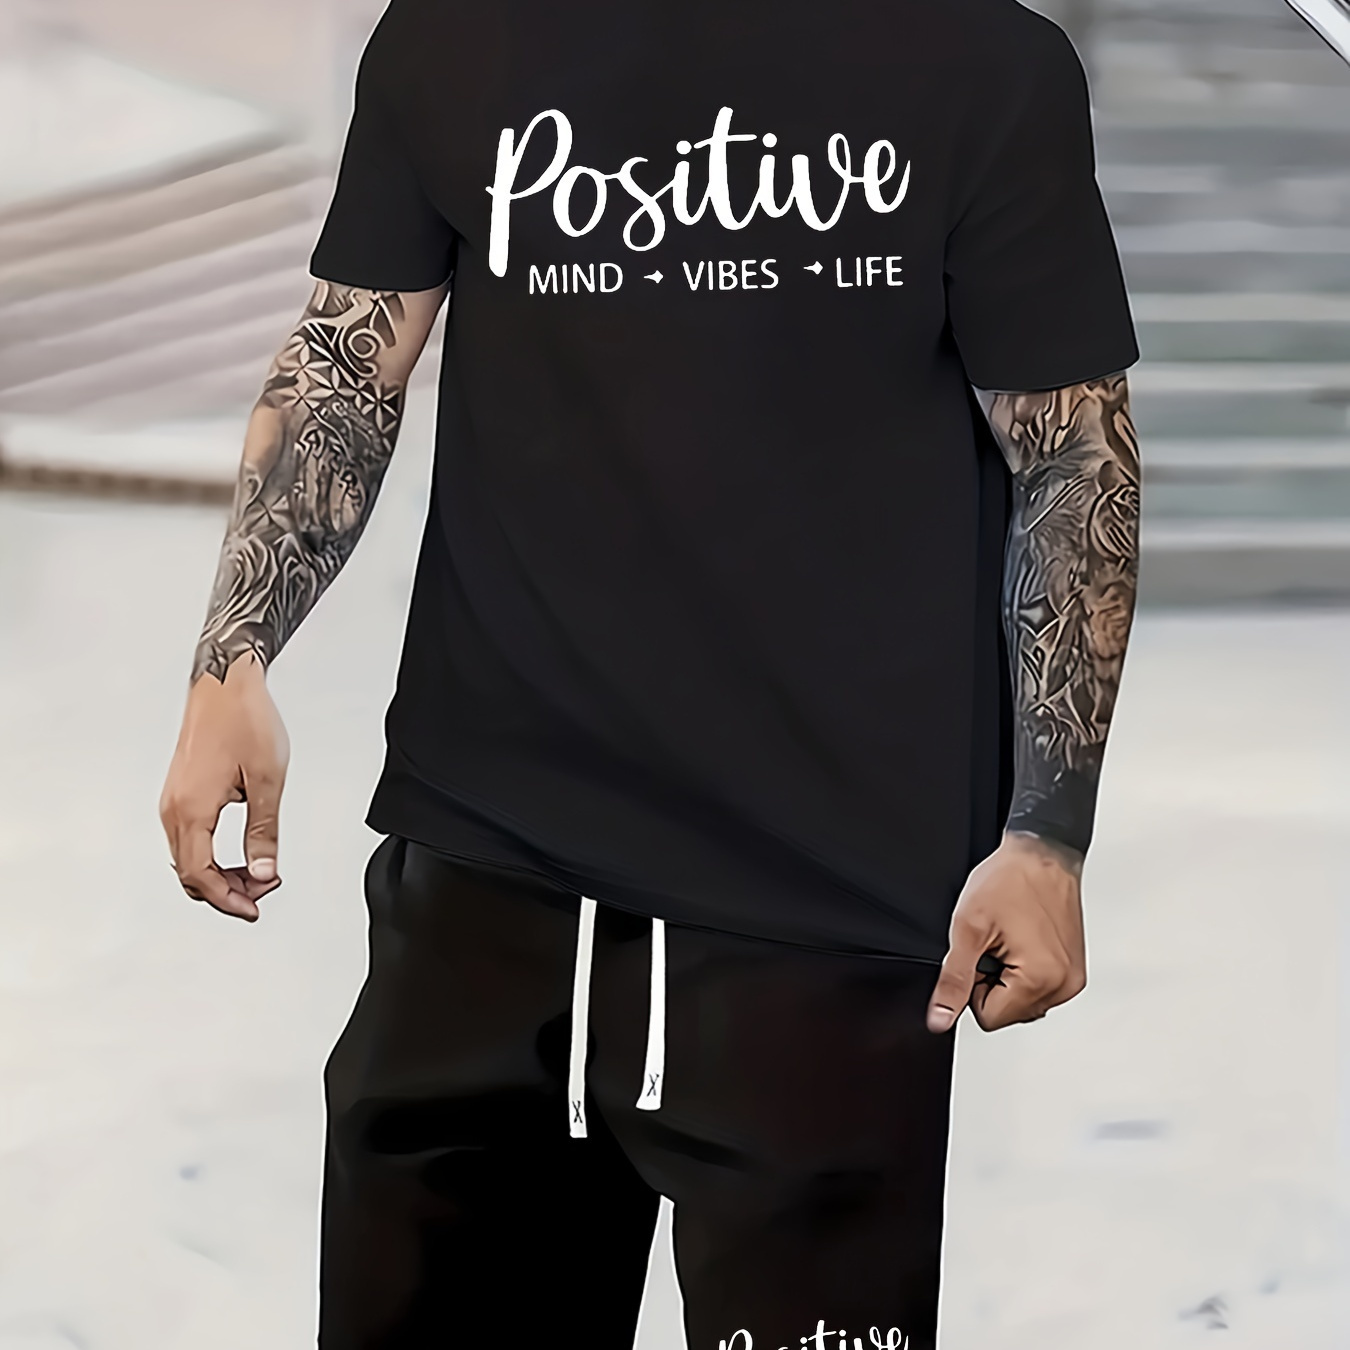 

Positive Mind Vibes Life Print Men's 2-piece Set, Casual Fashion Short Sleeve Crew Neck T-shirt & Athletic Shorts Co Ord Set, Cool Trendy Summer Sportswear